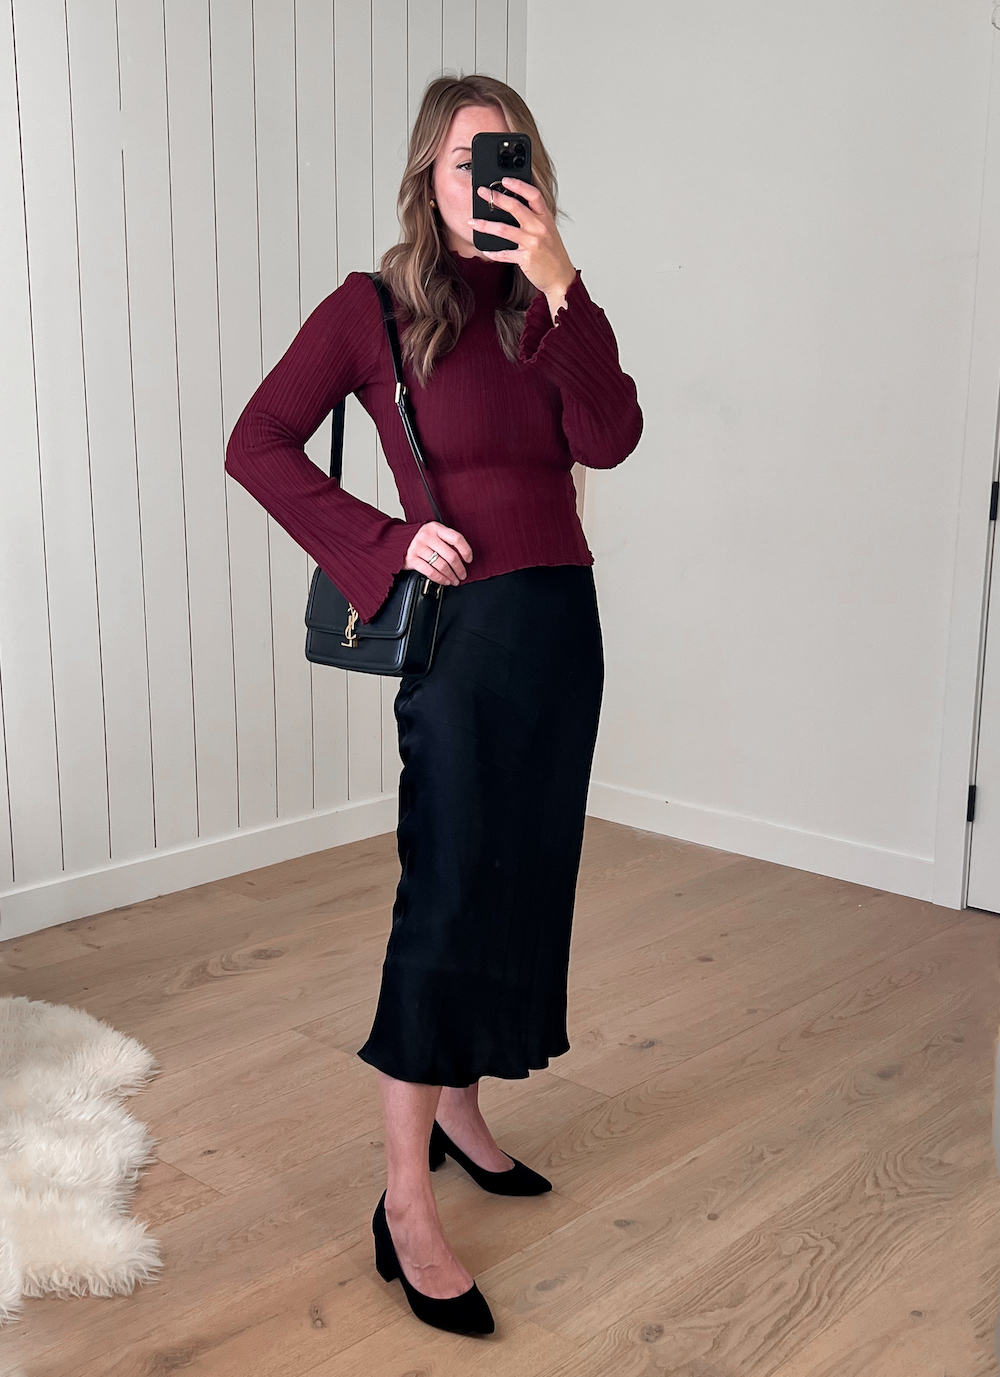 A woman wearing a black silk midi skirt with a red knit crewneck sweater, black heels, and a black shoulder bag